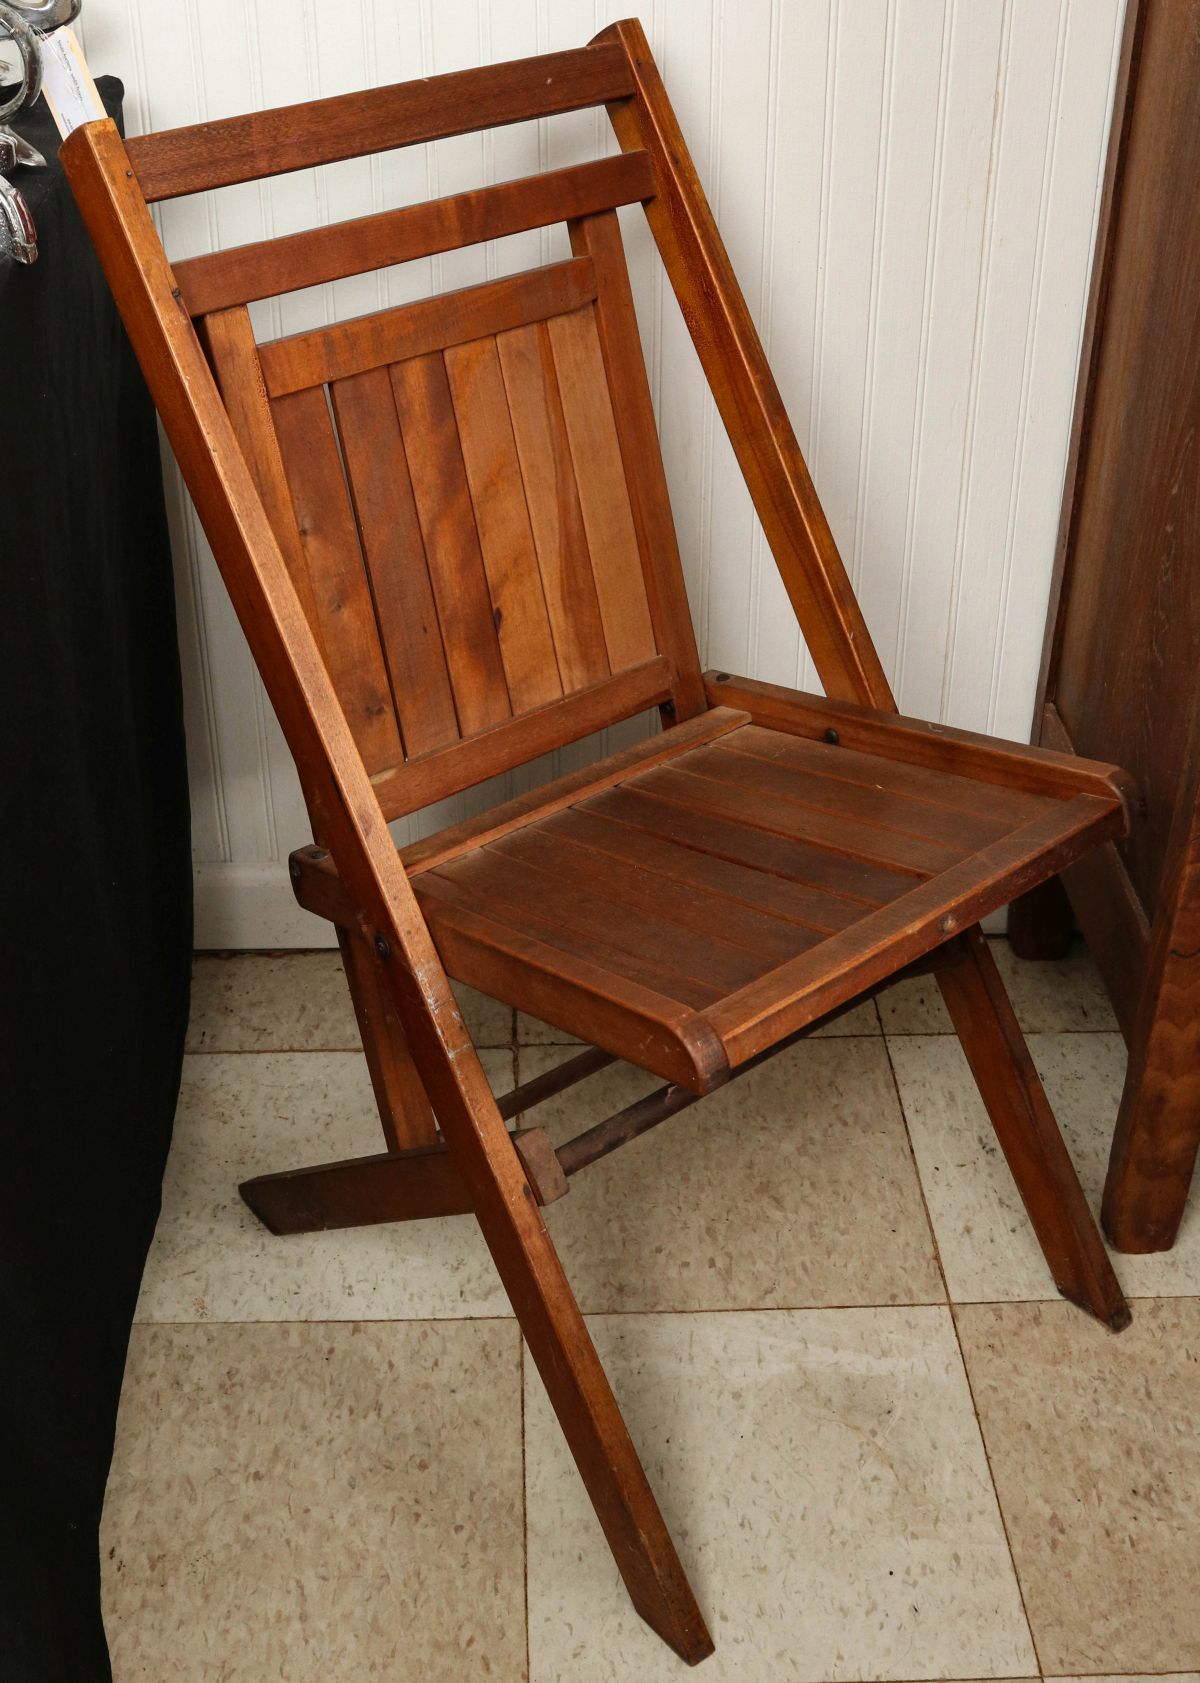 FOUR EARLY 20TH CENTURY WOOD FOLDING CHAIRS